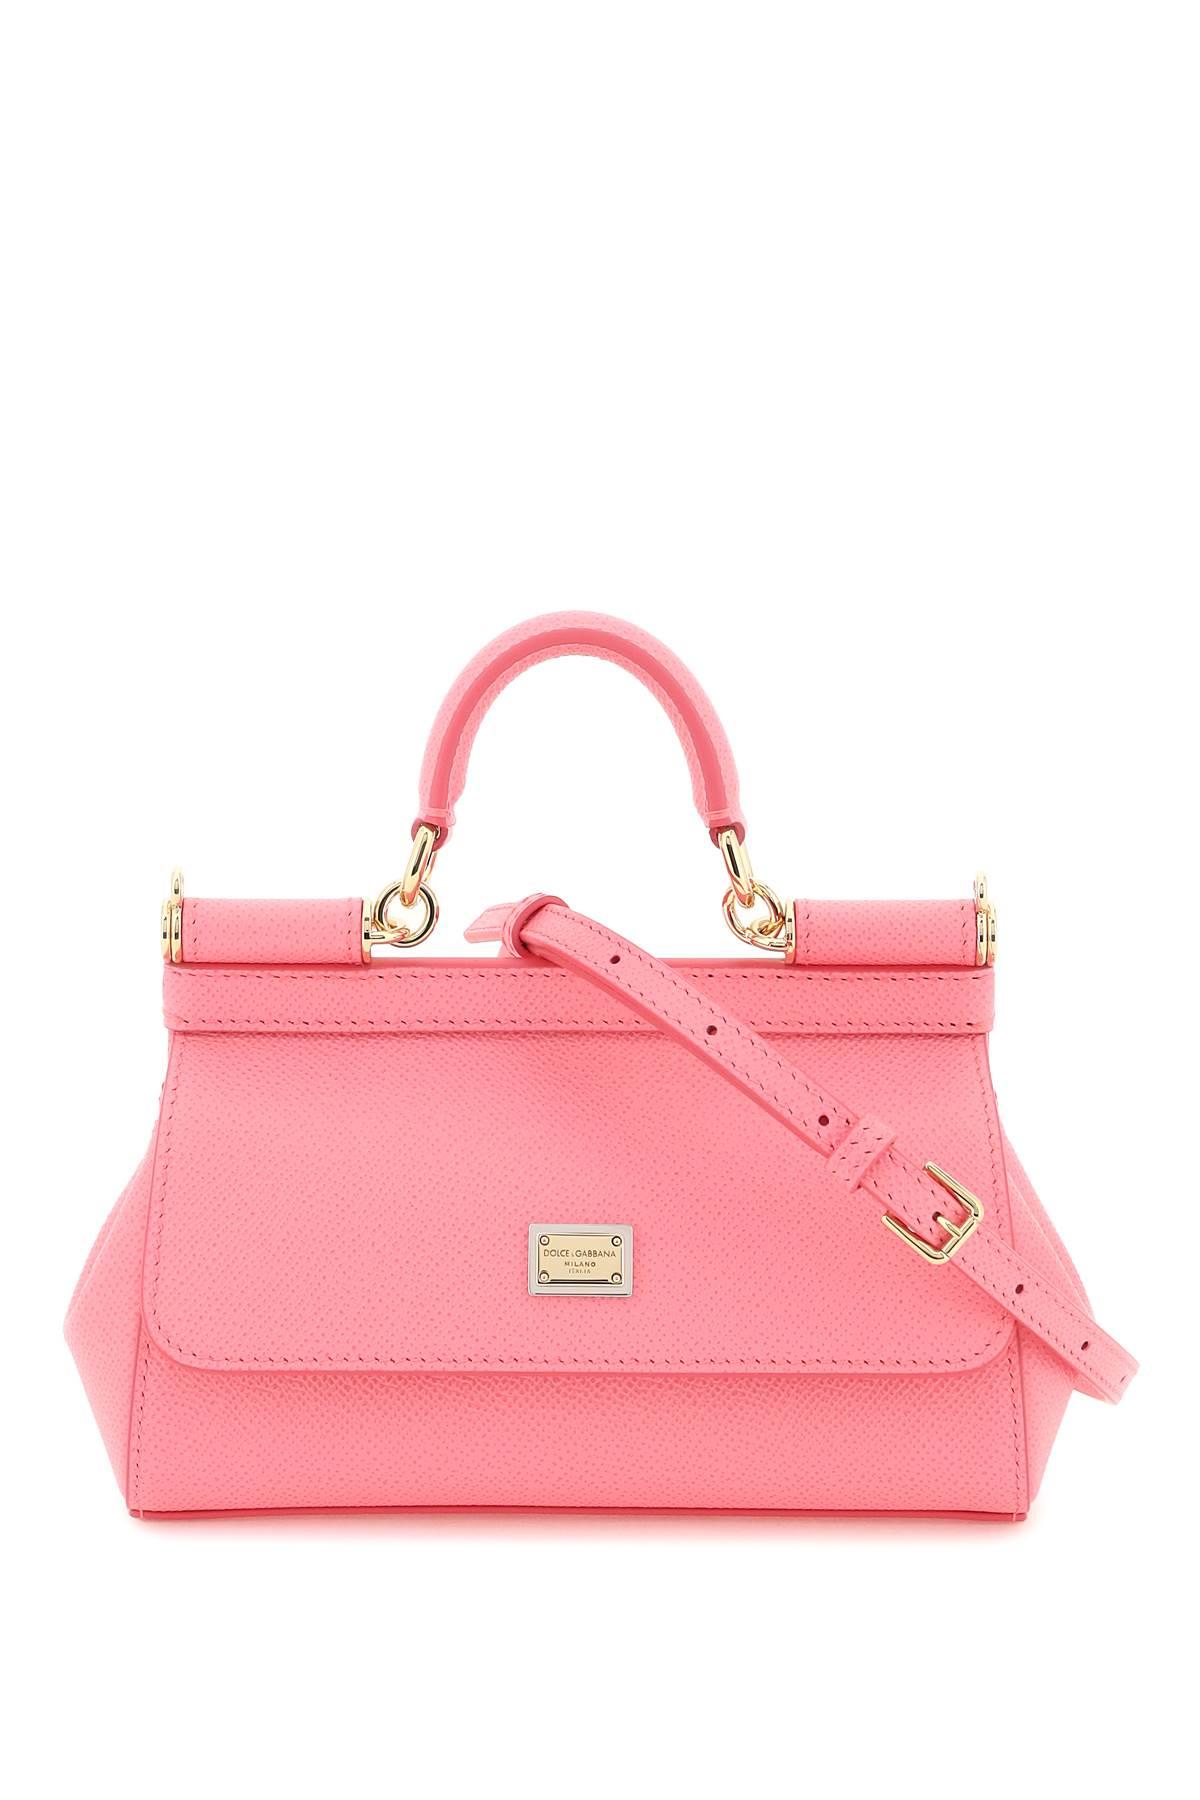 Dolce & Gabbana - Sicily Small Dauphine Leather Rosa